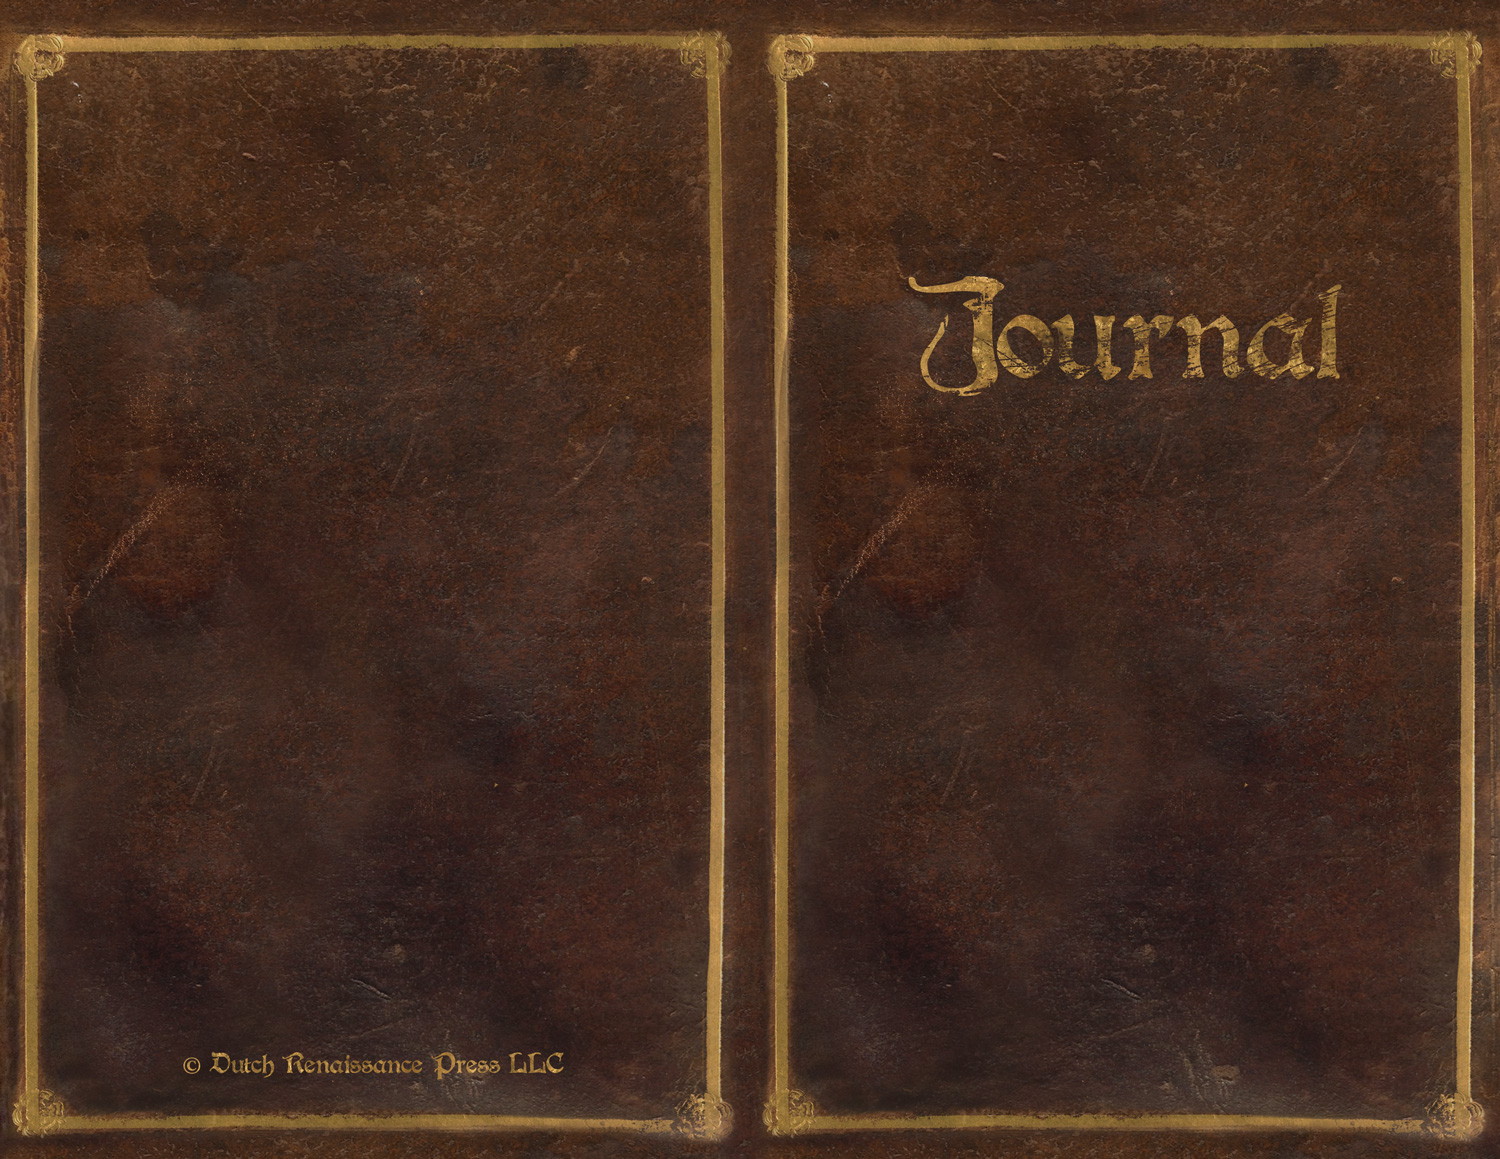 Free Writing Journal Templates Make Your Own Journal